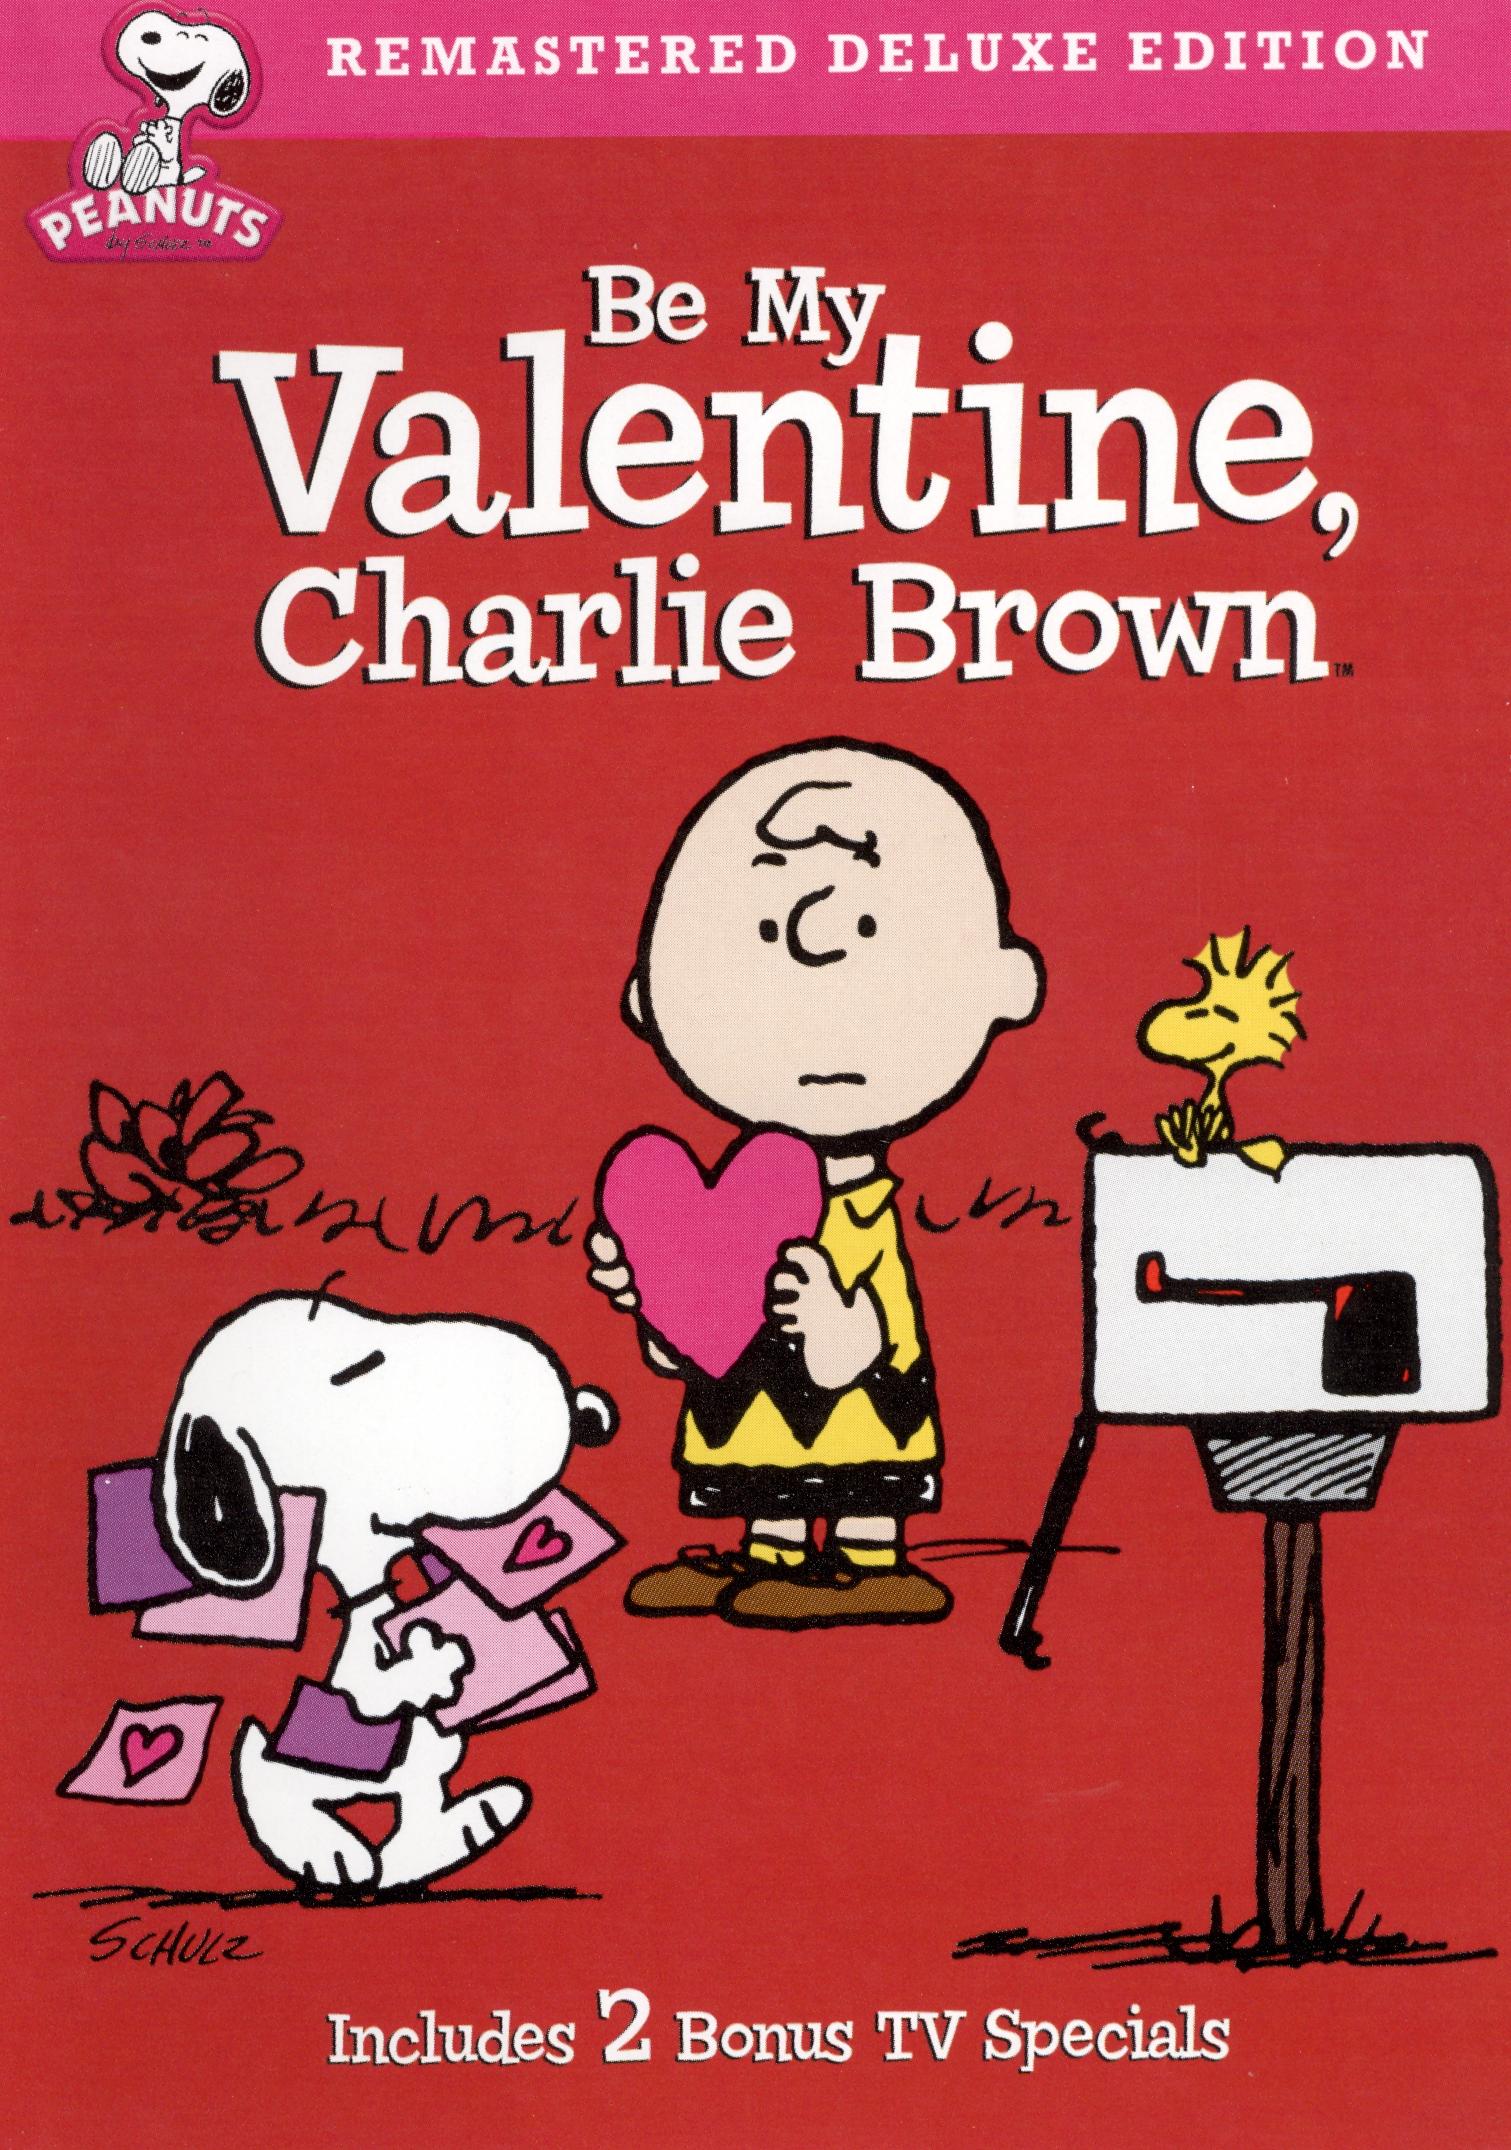 Be My Valentine Charlie Brown [Deluxe Edition] [1975] - Best Buy